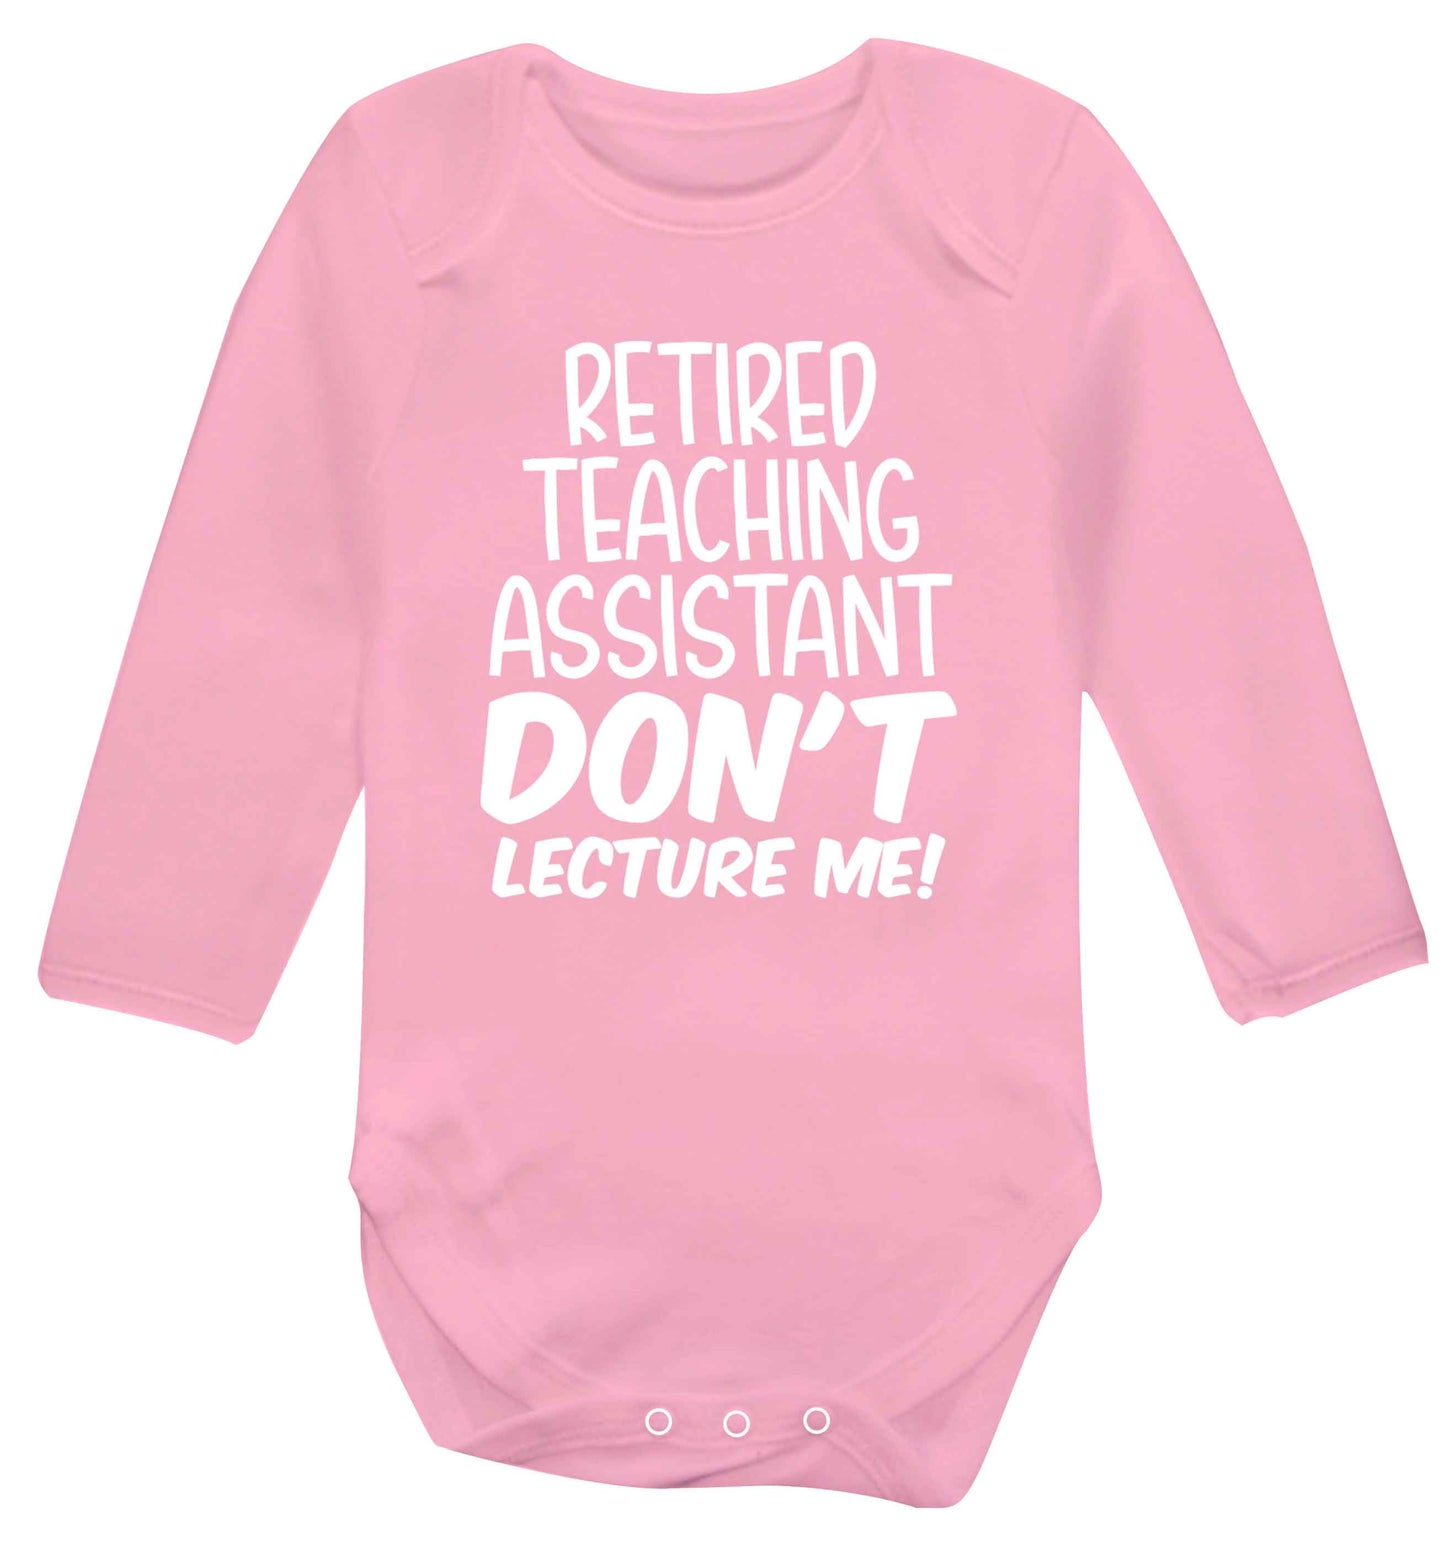 Retired teaching assistant don't lecture me Baby Vest long sleeved pale pink 6-12 months